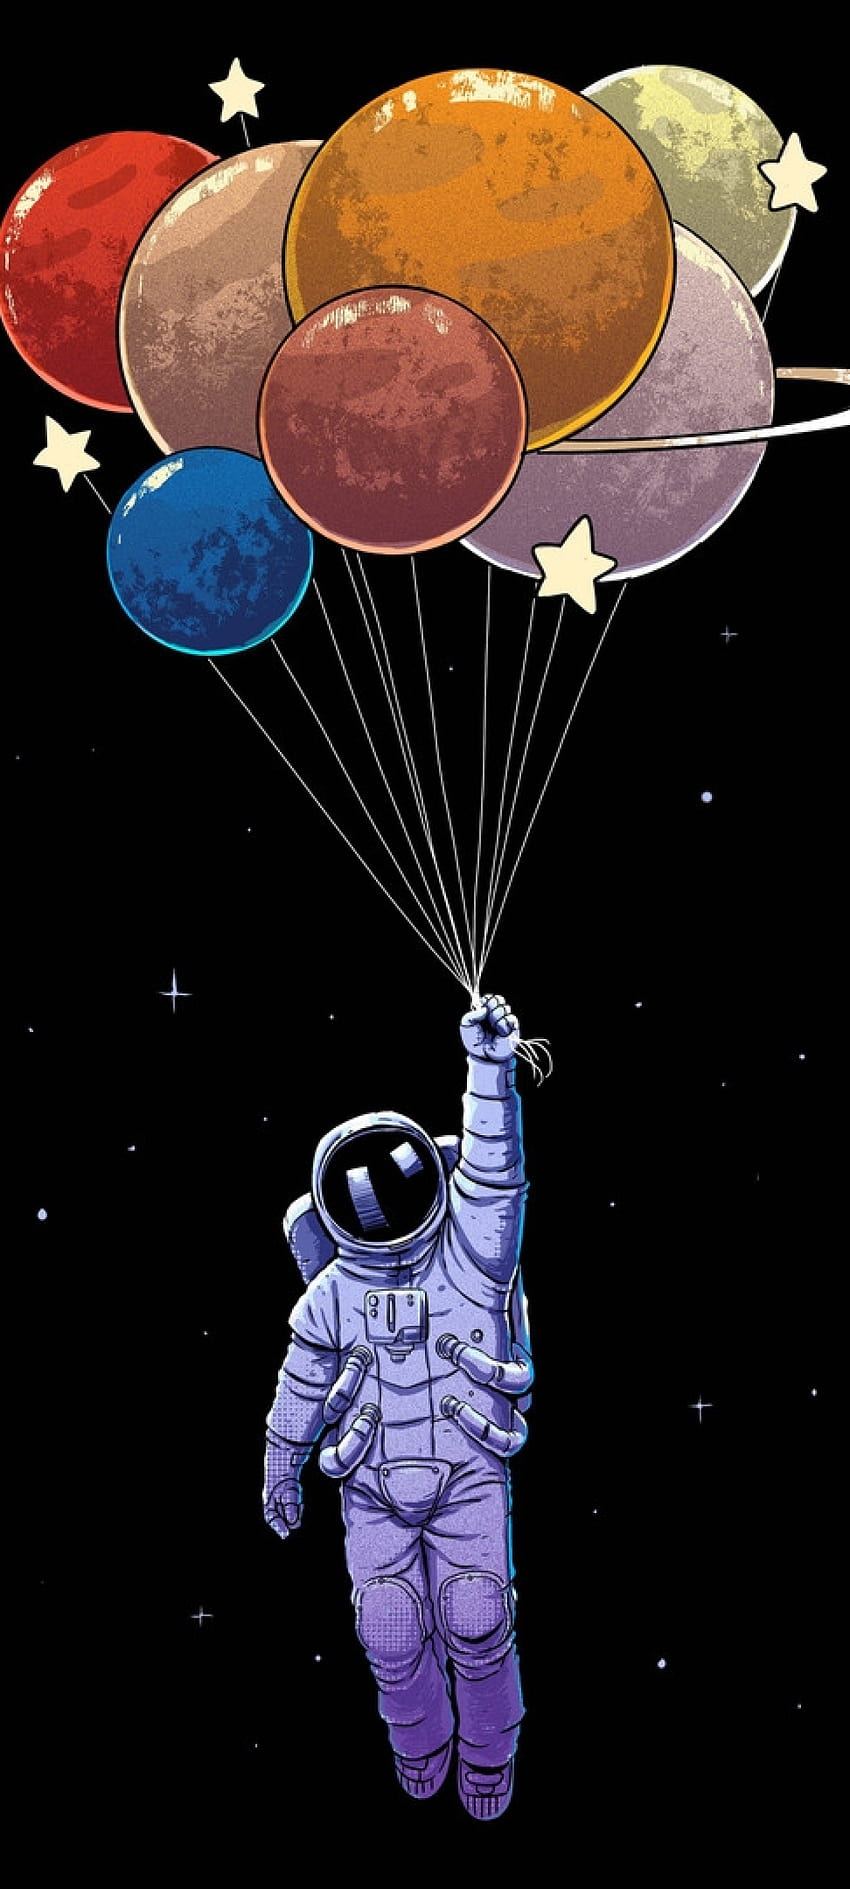 1440x3200 Astronaut, Flying With Balloons, Planet Shaped, Uranus, Neptune, Pluto for Samsung Galaxy S20 Ultra, Samsung Galaxy S2 Plus, Samsung Galaxy S20, samsung s20 astronauts HD phone wallpaper